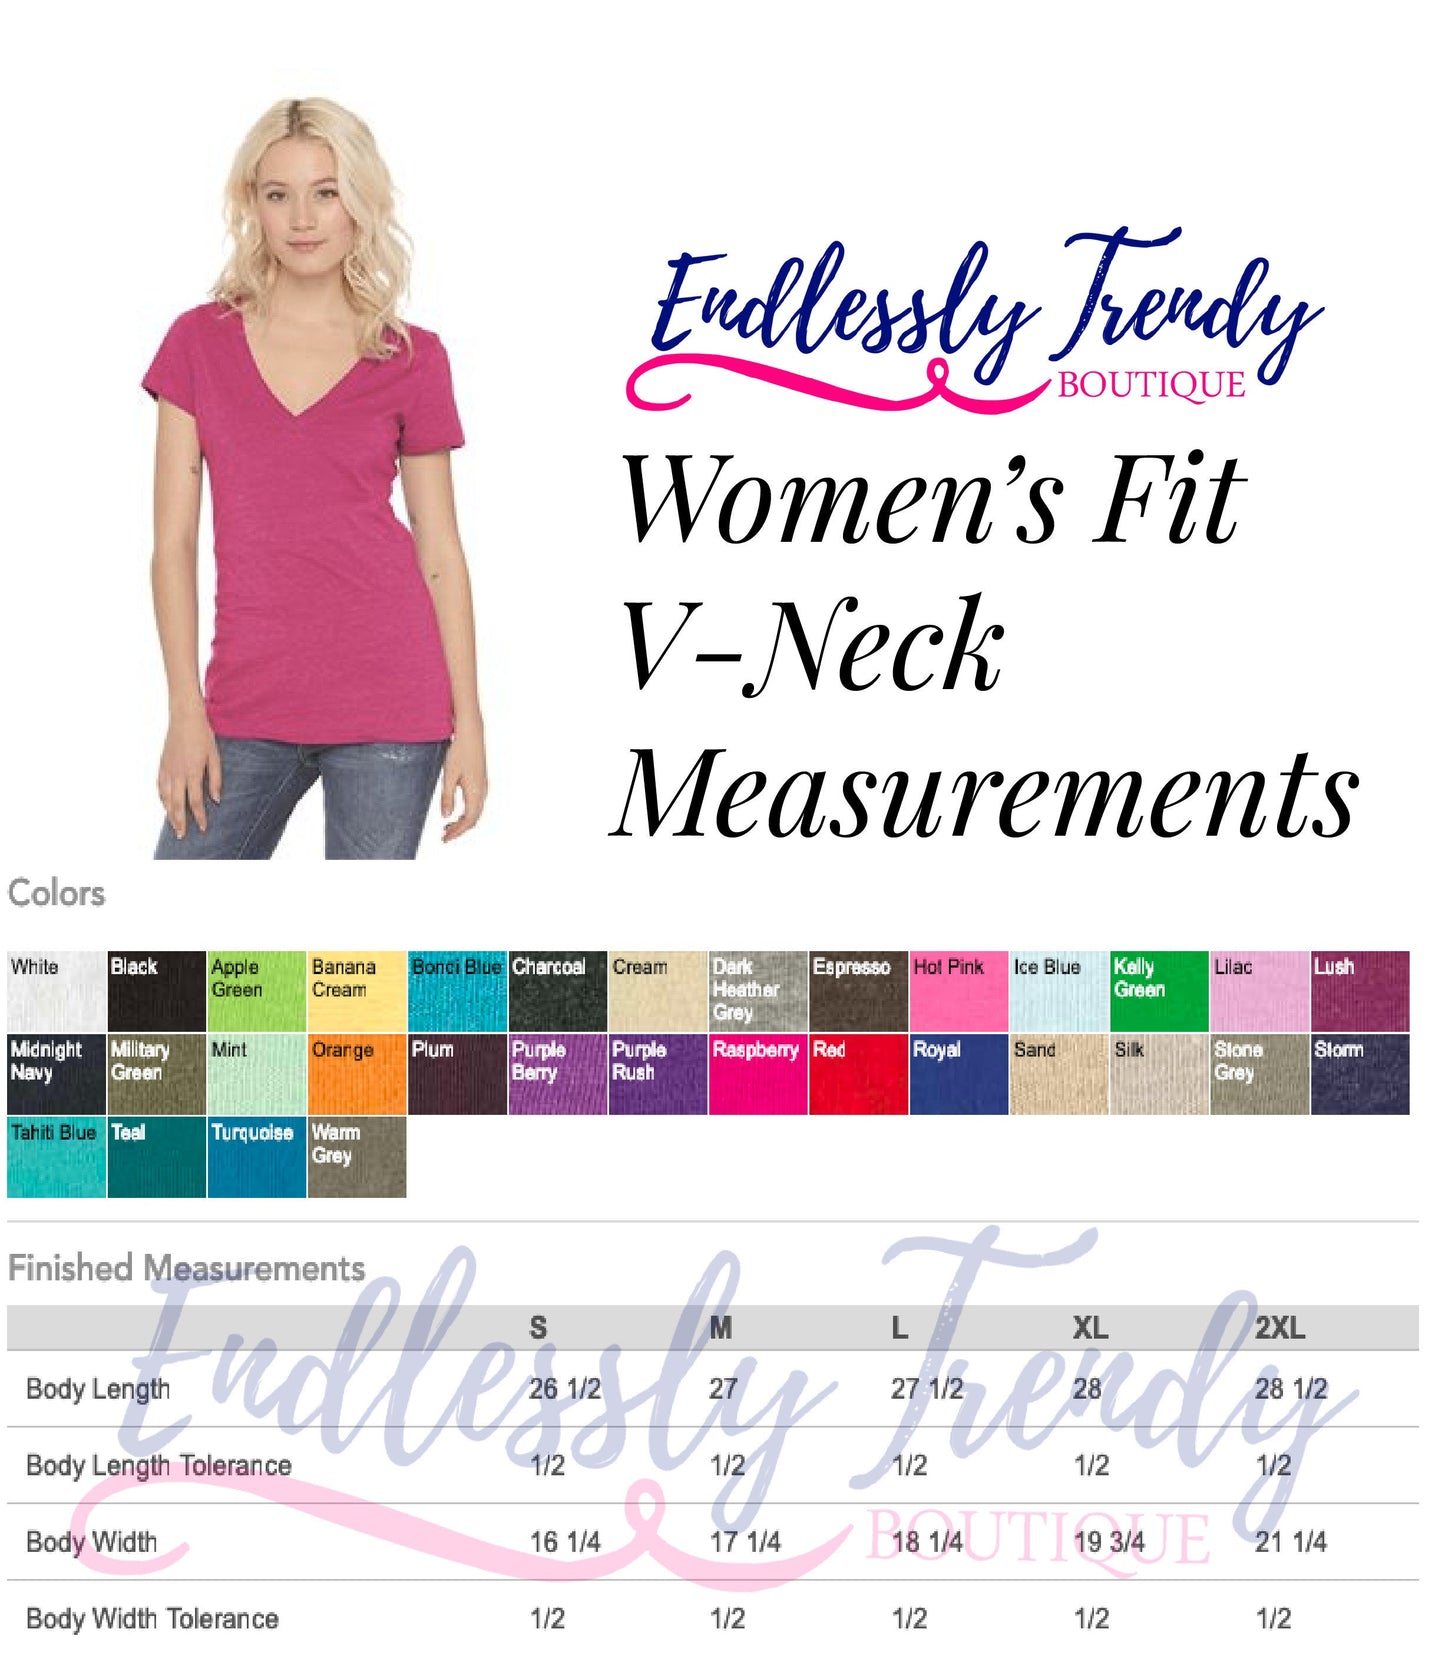 Feel. Step. Walk. Christian T-Shirt* - Endlessly Trendy Boutique